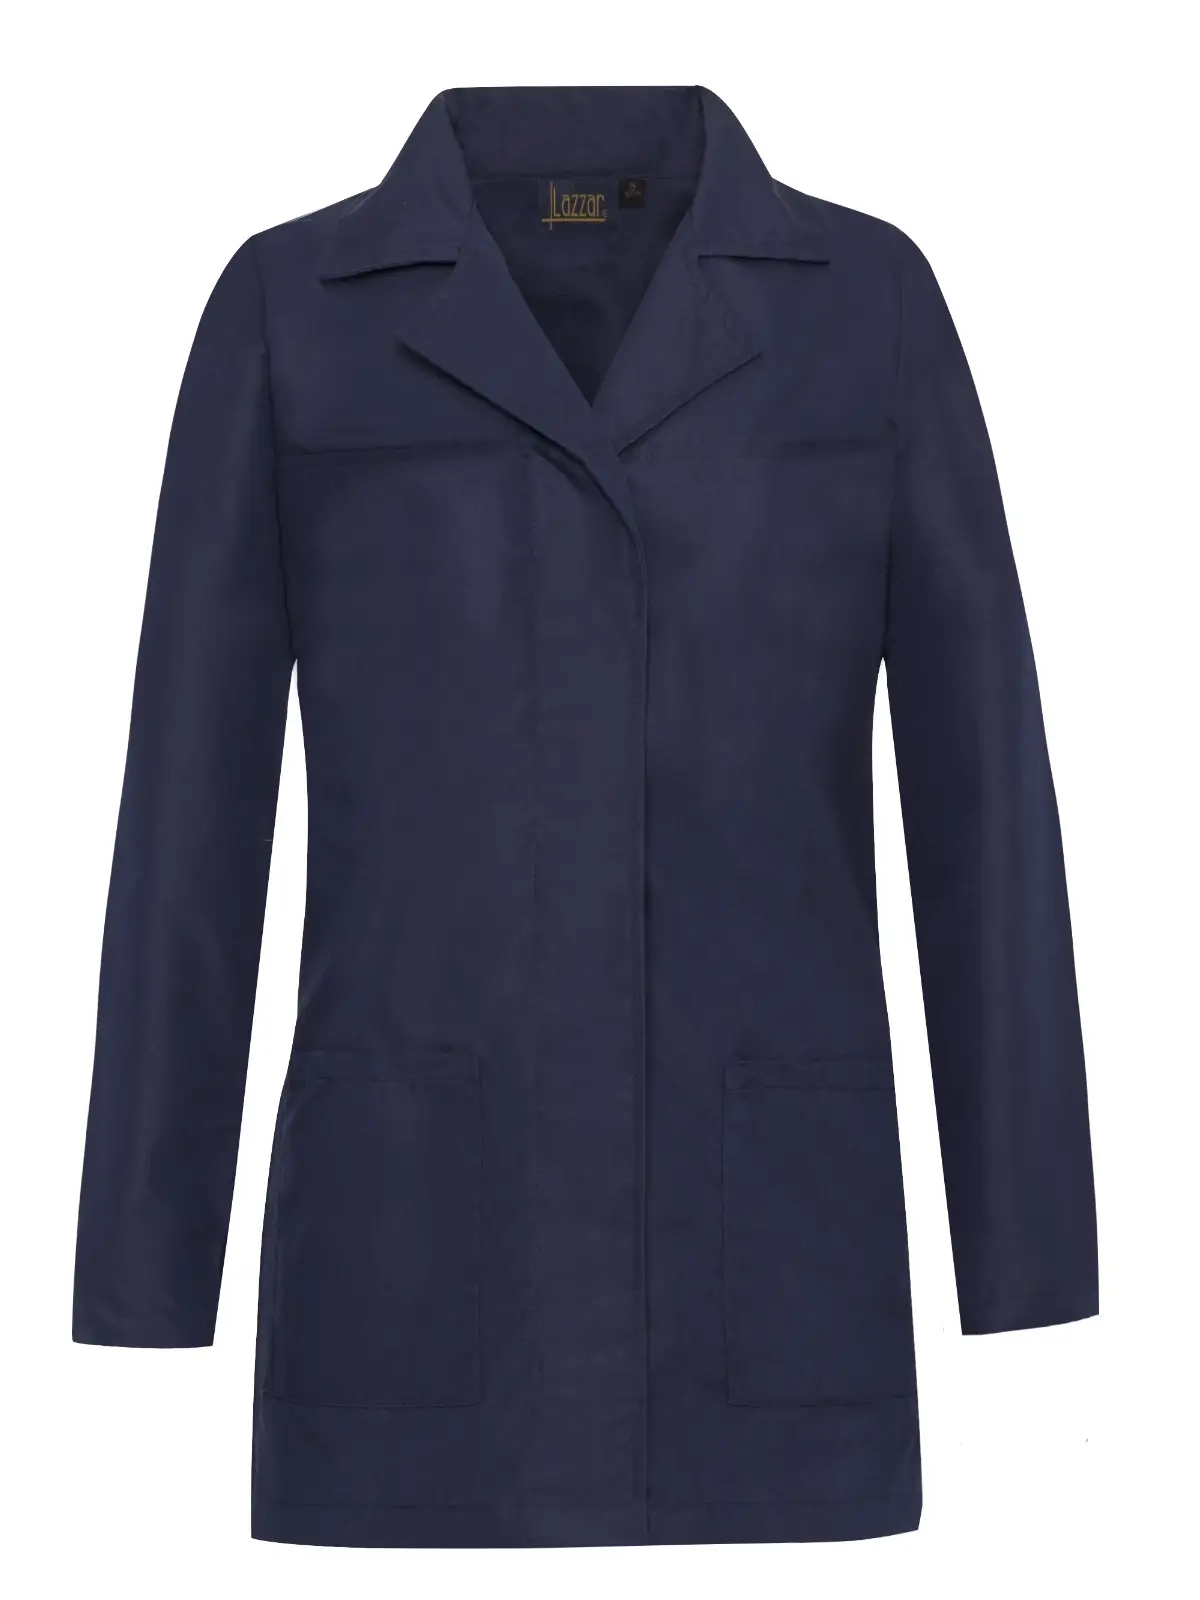 Embroidered Lab Coat navy